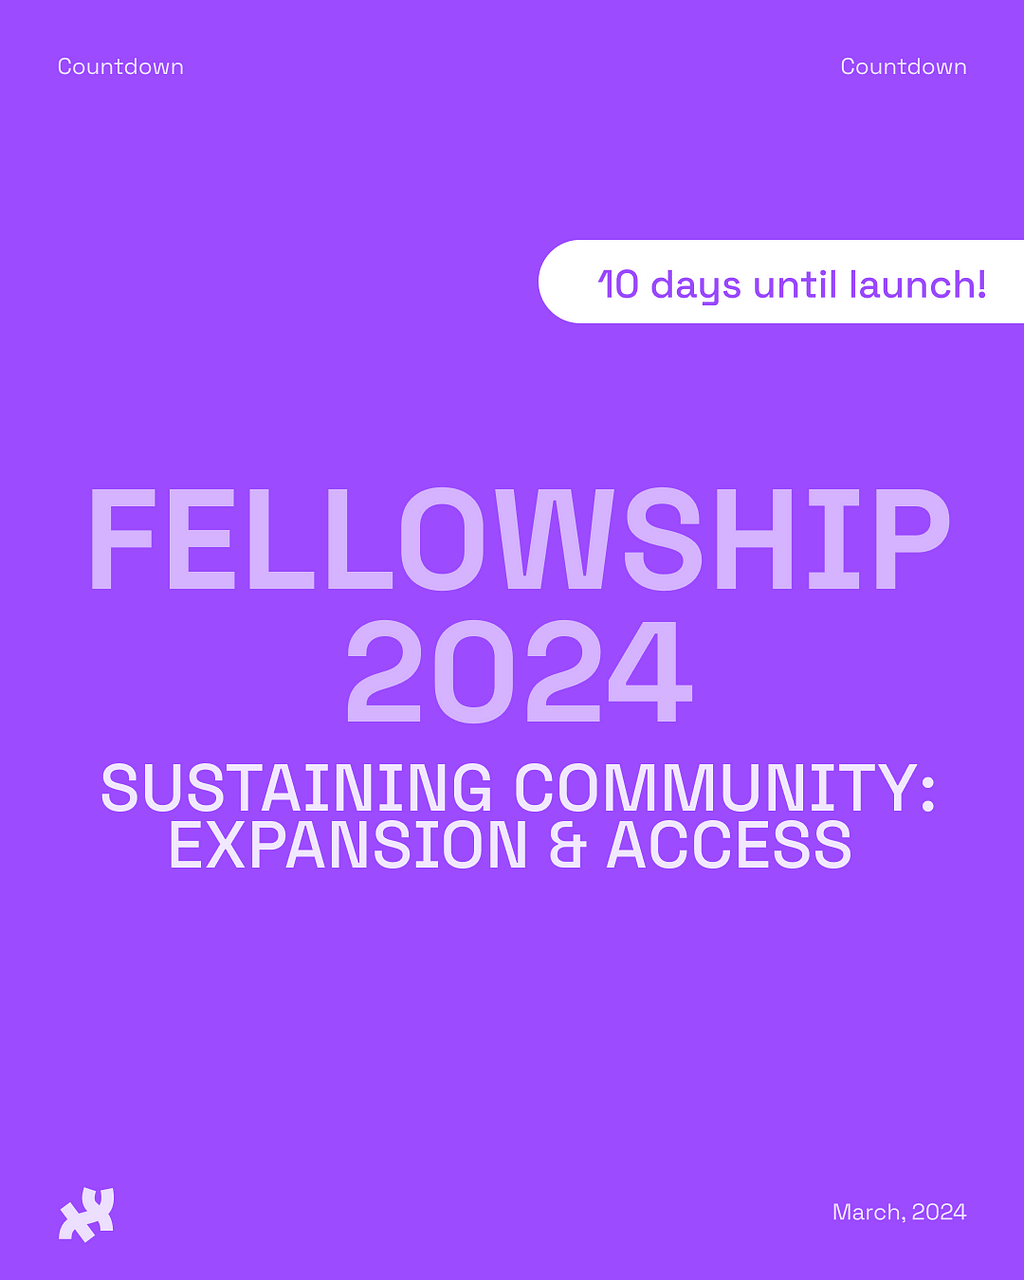 A purple graphic with the title, ‘fellowship 2024’ with subtitle, ‘Sustaining Community: Expansion & Access’ with header, ‘Countdown’ and footer ‘March, 2024’ with the Processing foundation logo. There is a white line that says ’10 days until launch!’ on the top right corner.